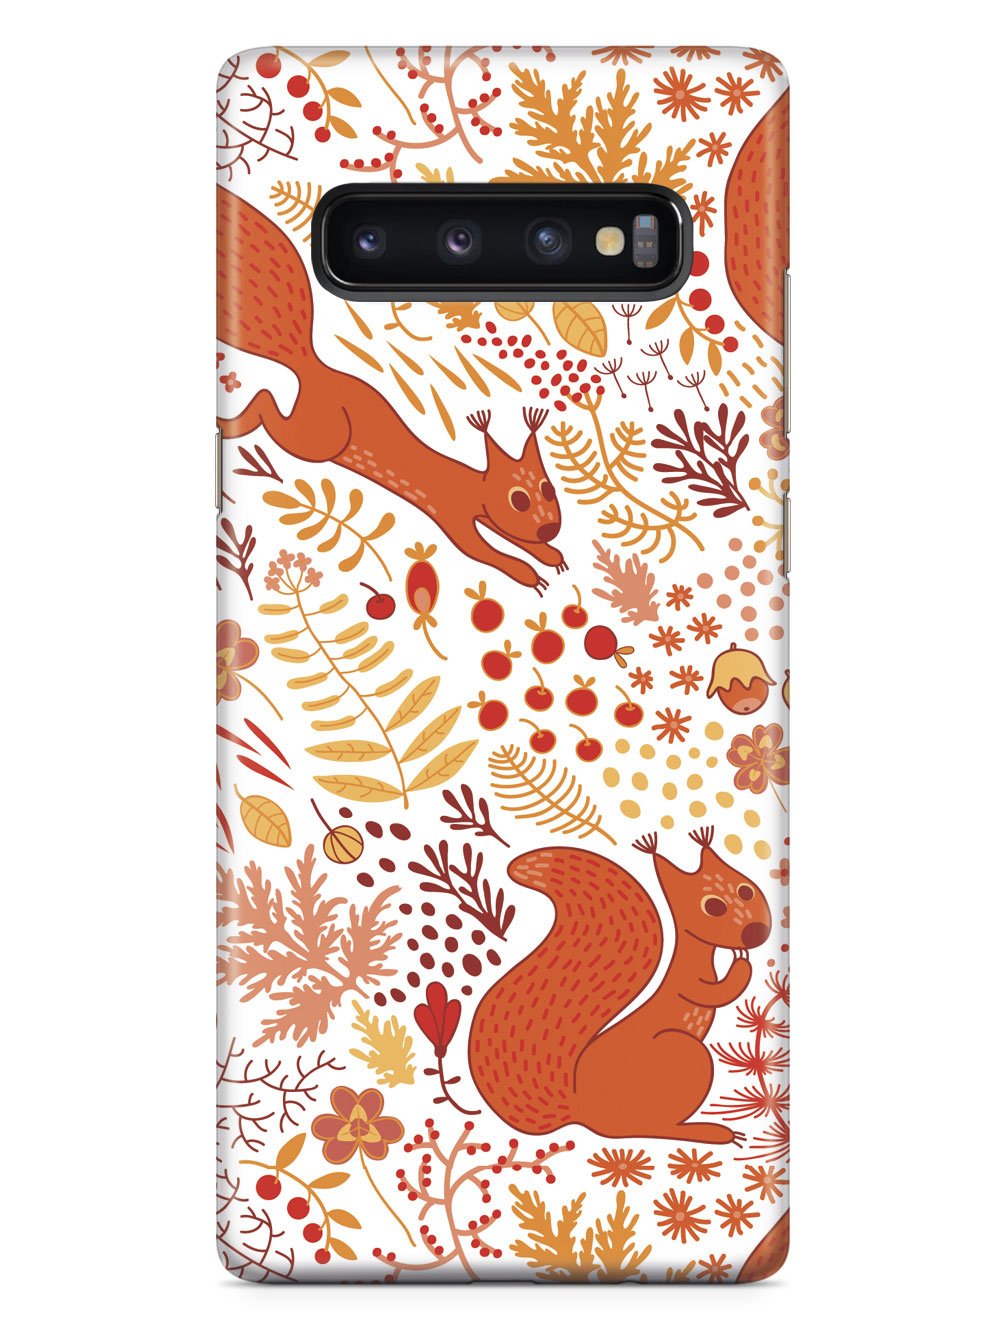 Squirrel Fall Pattern - White Case